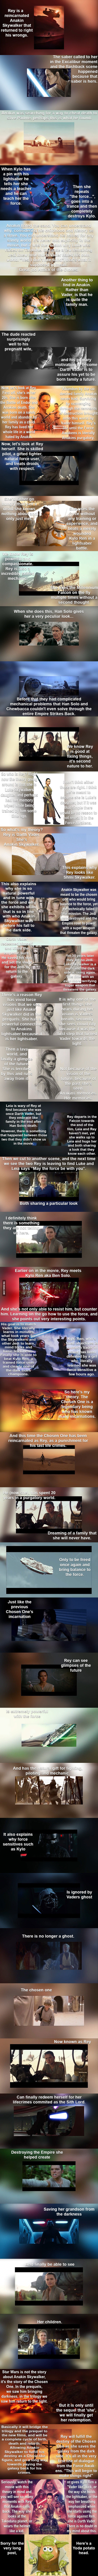 Rey from Star Wars: The Force Awakens Fan Theory